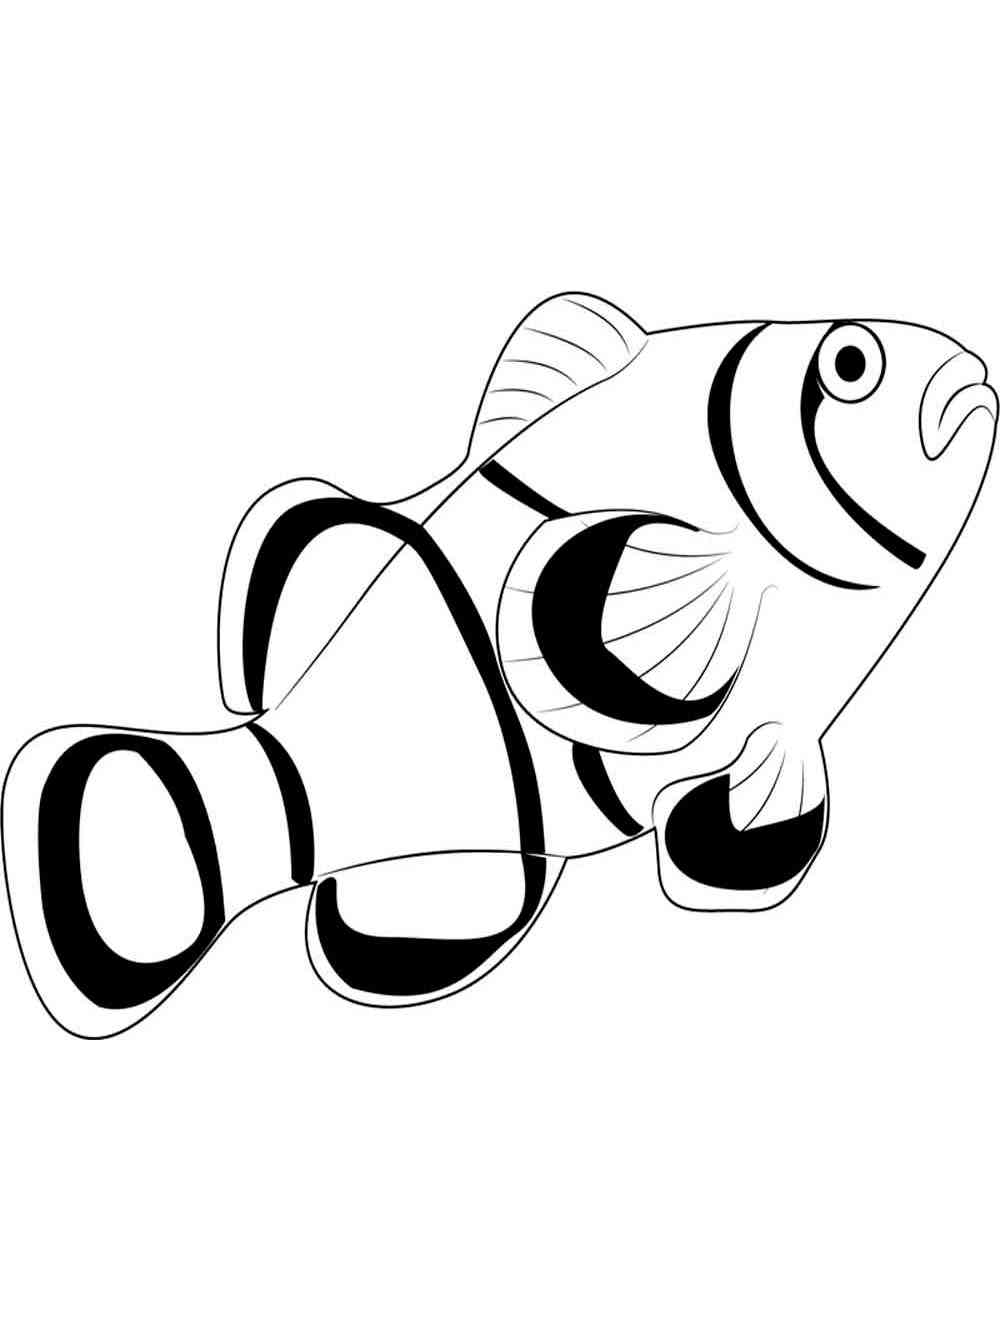 Clownfish 11 coloring page